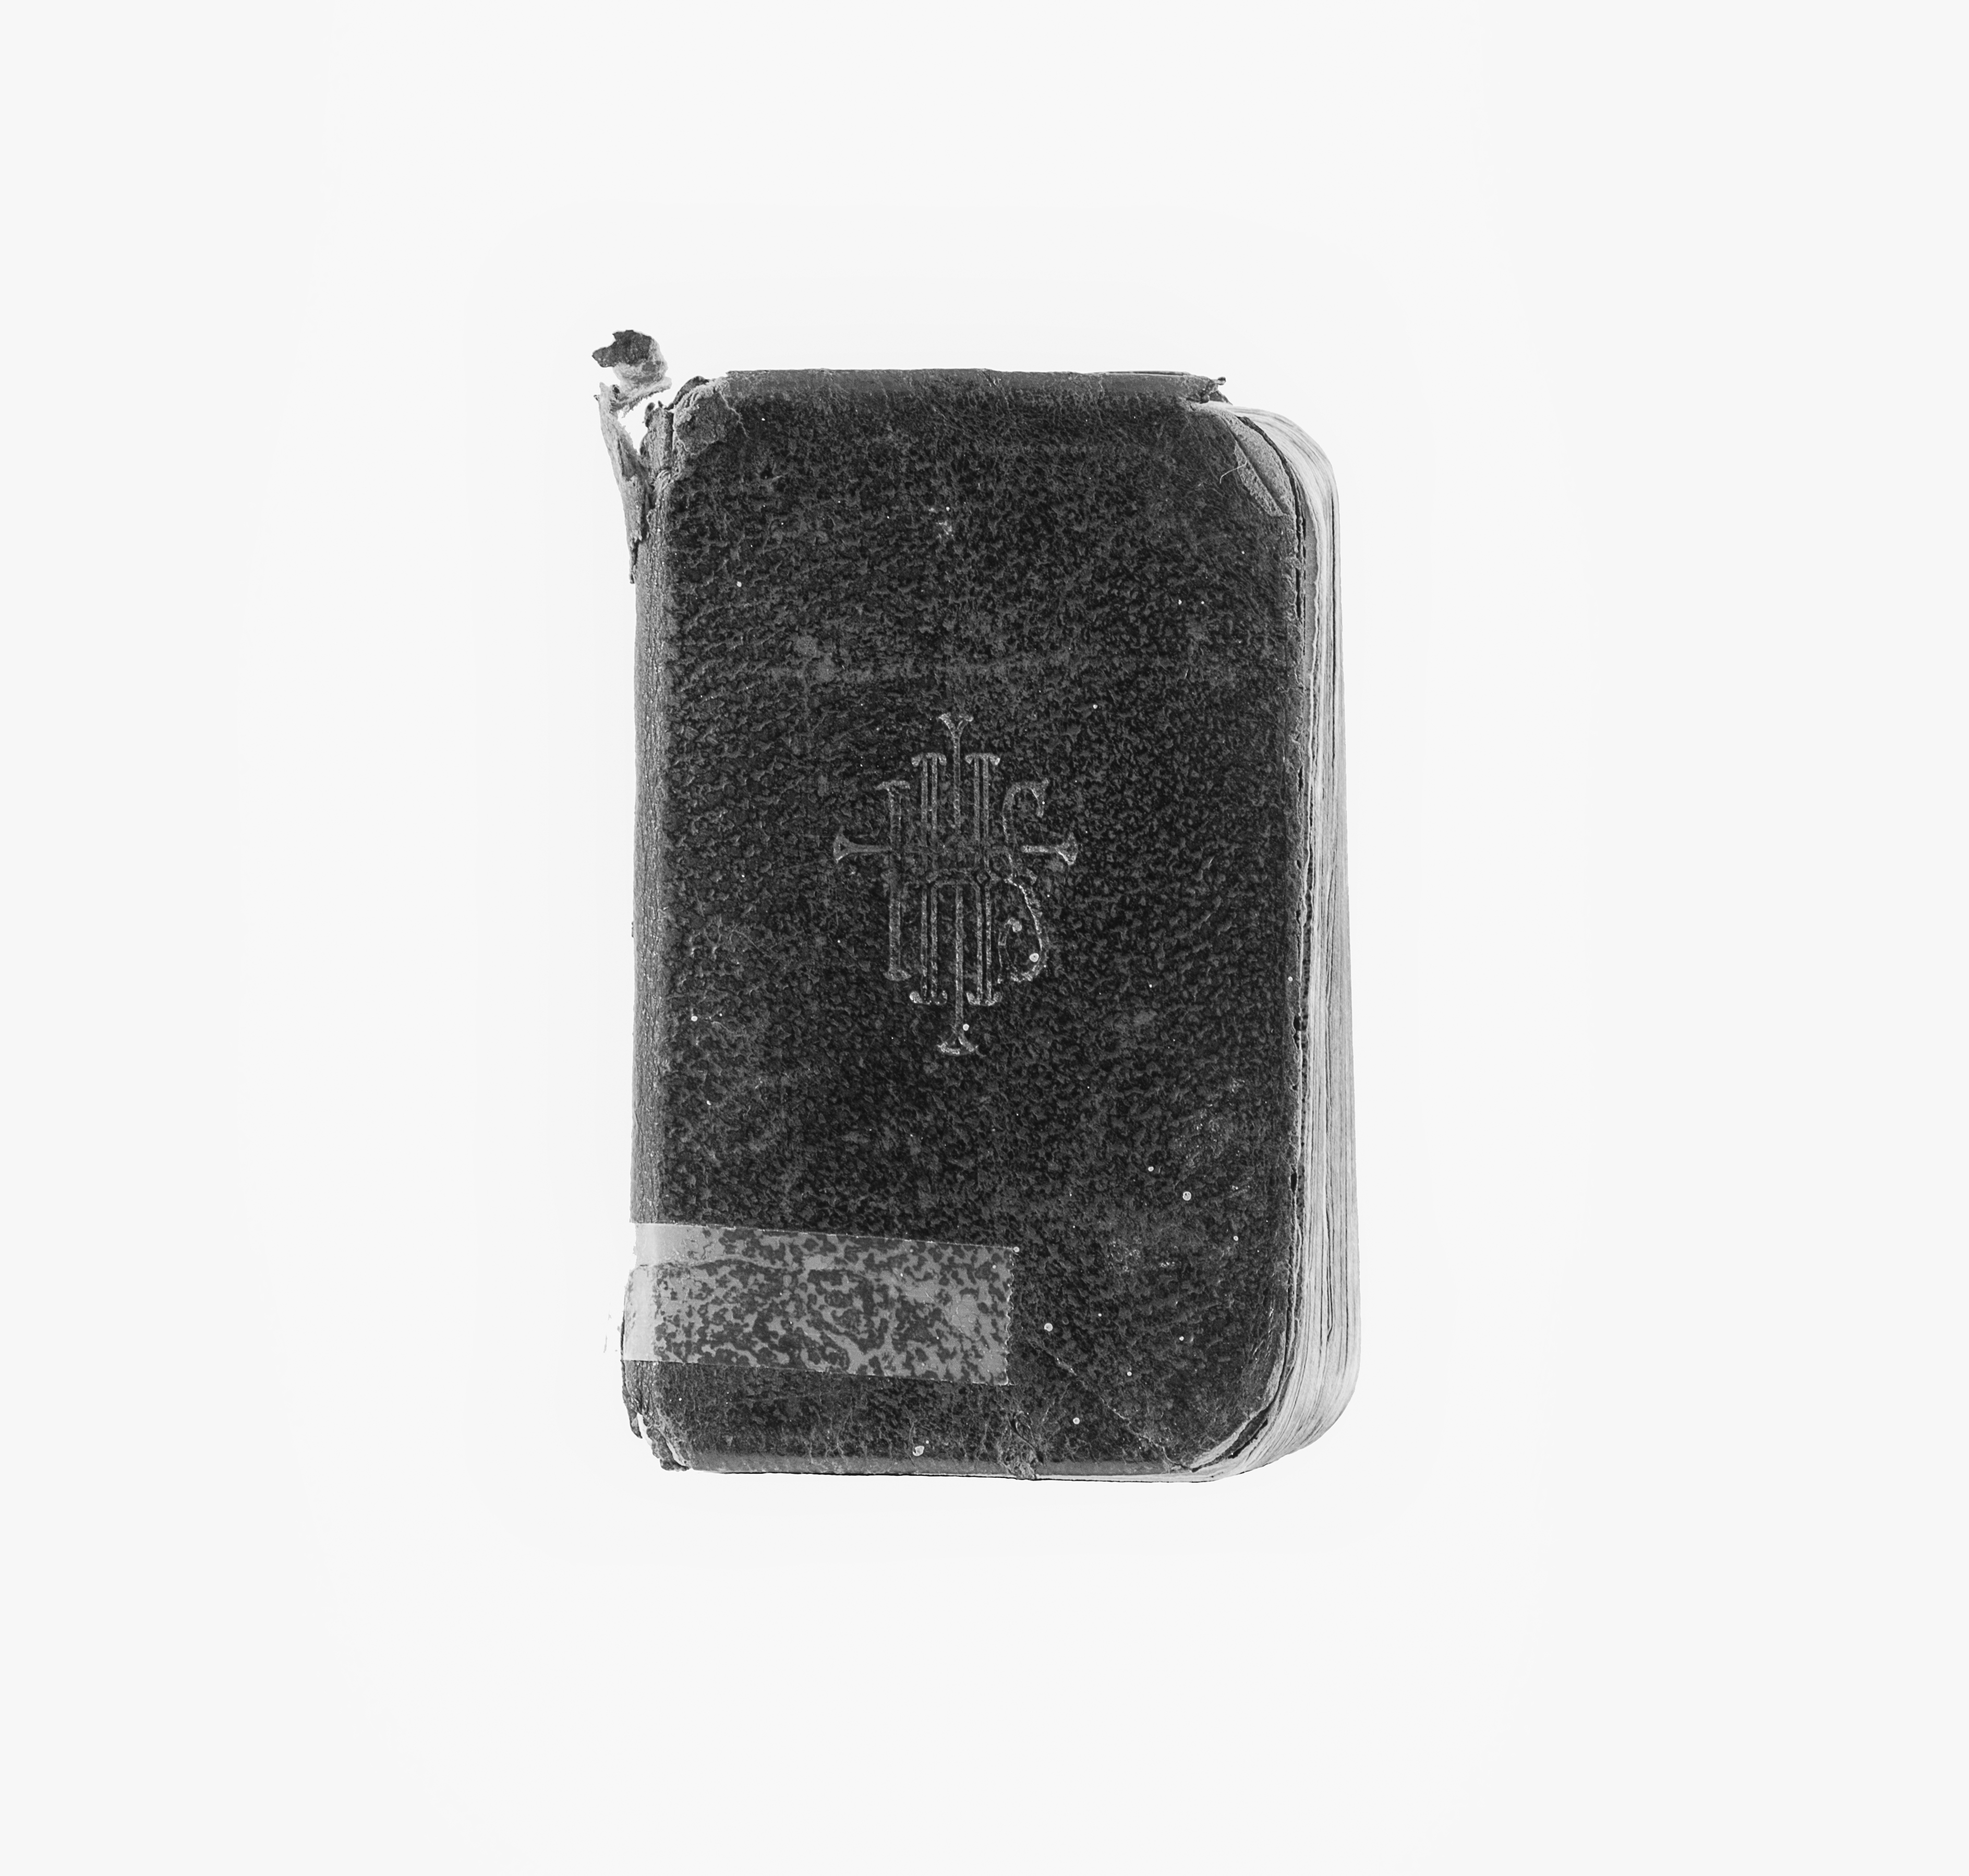 Black and white modern photograph of prayer book with black cover and white pages. Cover has IHS inscribed on the front.